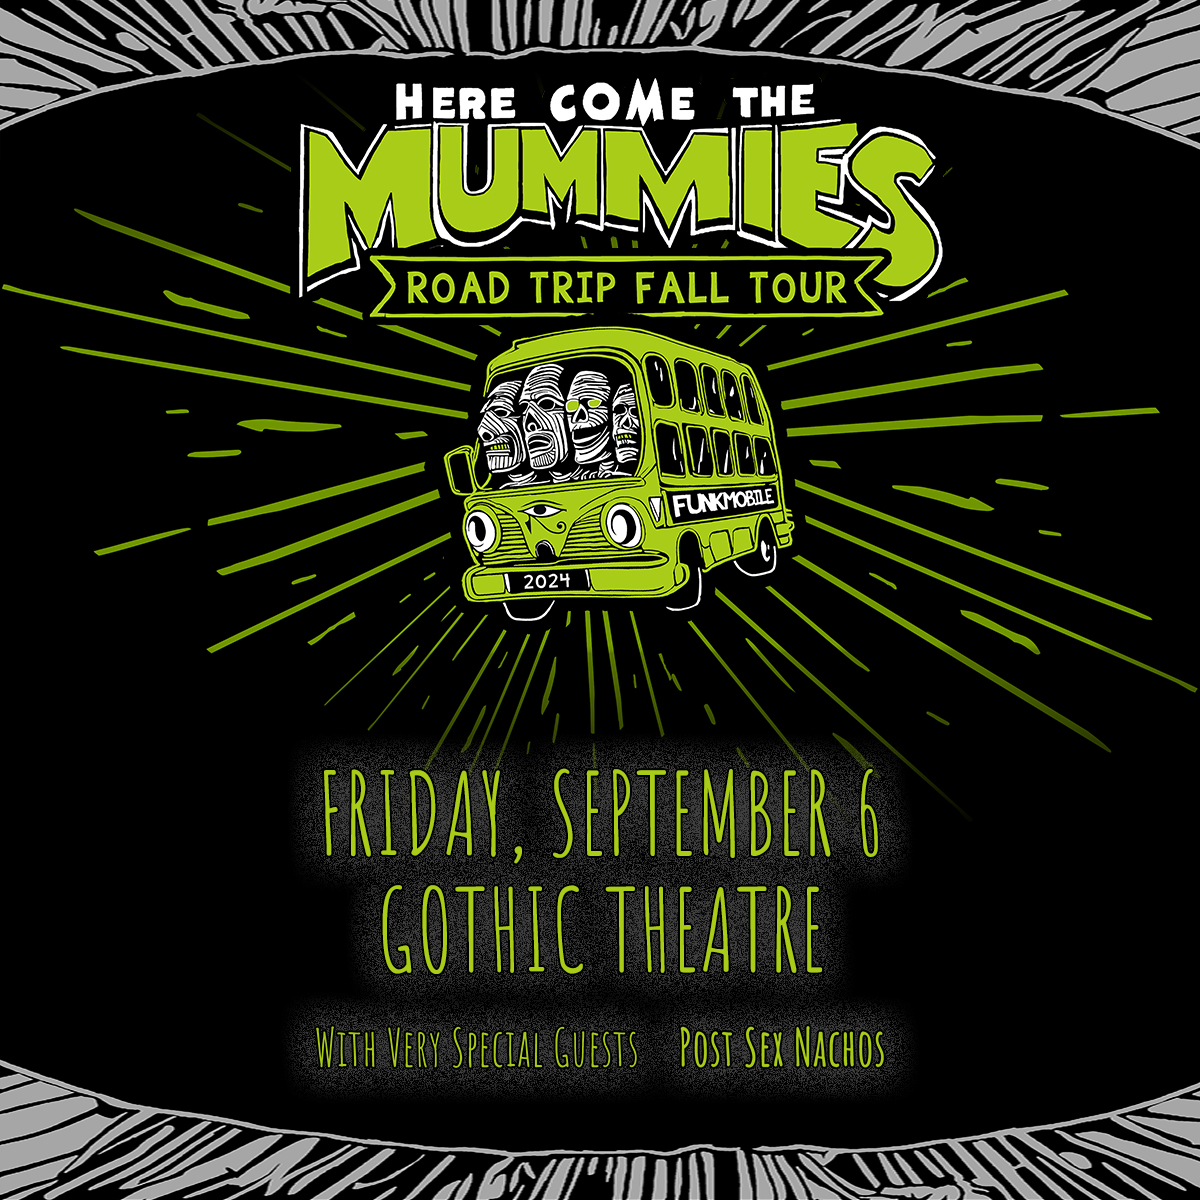 getting funky in denver ☠️ @hctmummies bring the funk here to gothic theatre on friday, september 6 🦂  presale is thursday at 10a-10p onsale 🎫 is friday at 10a